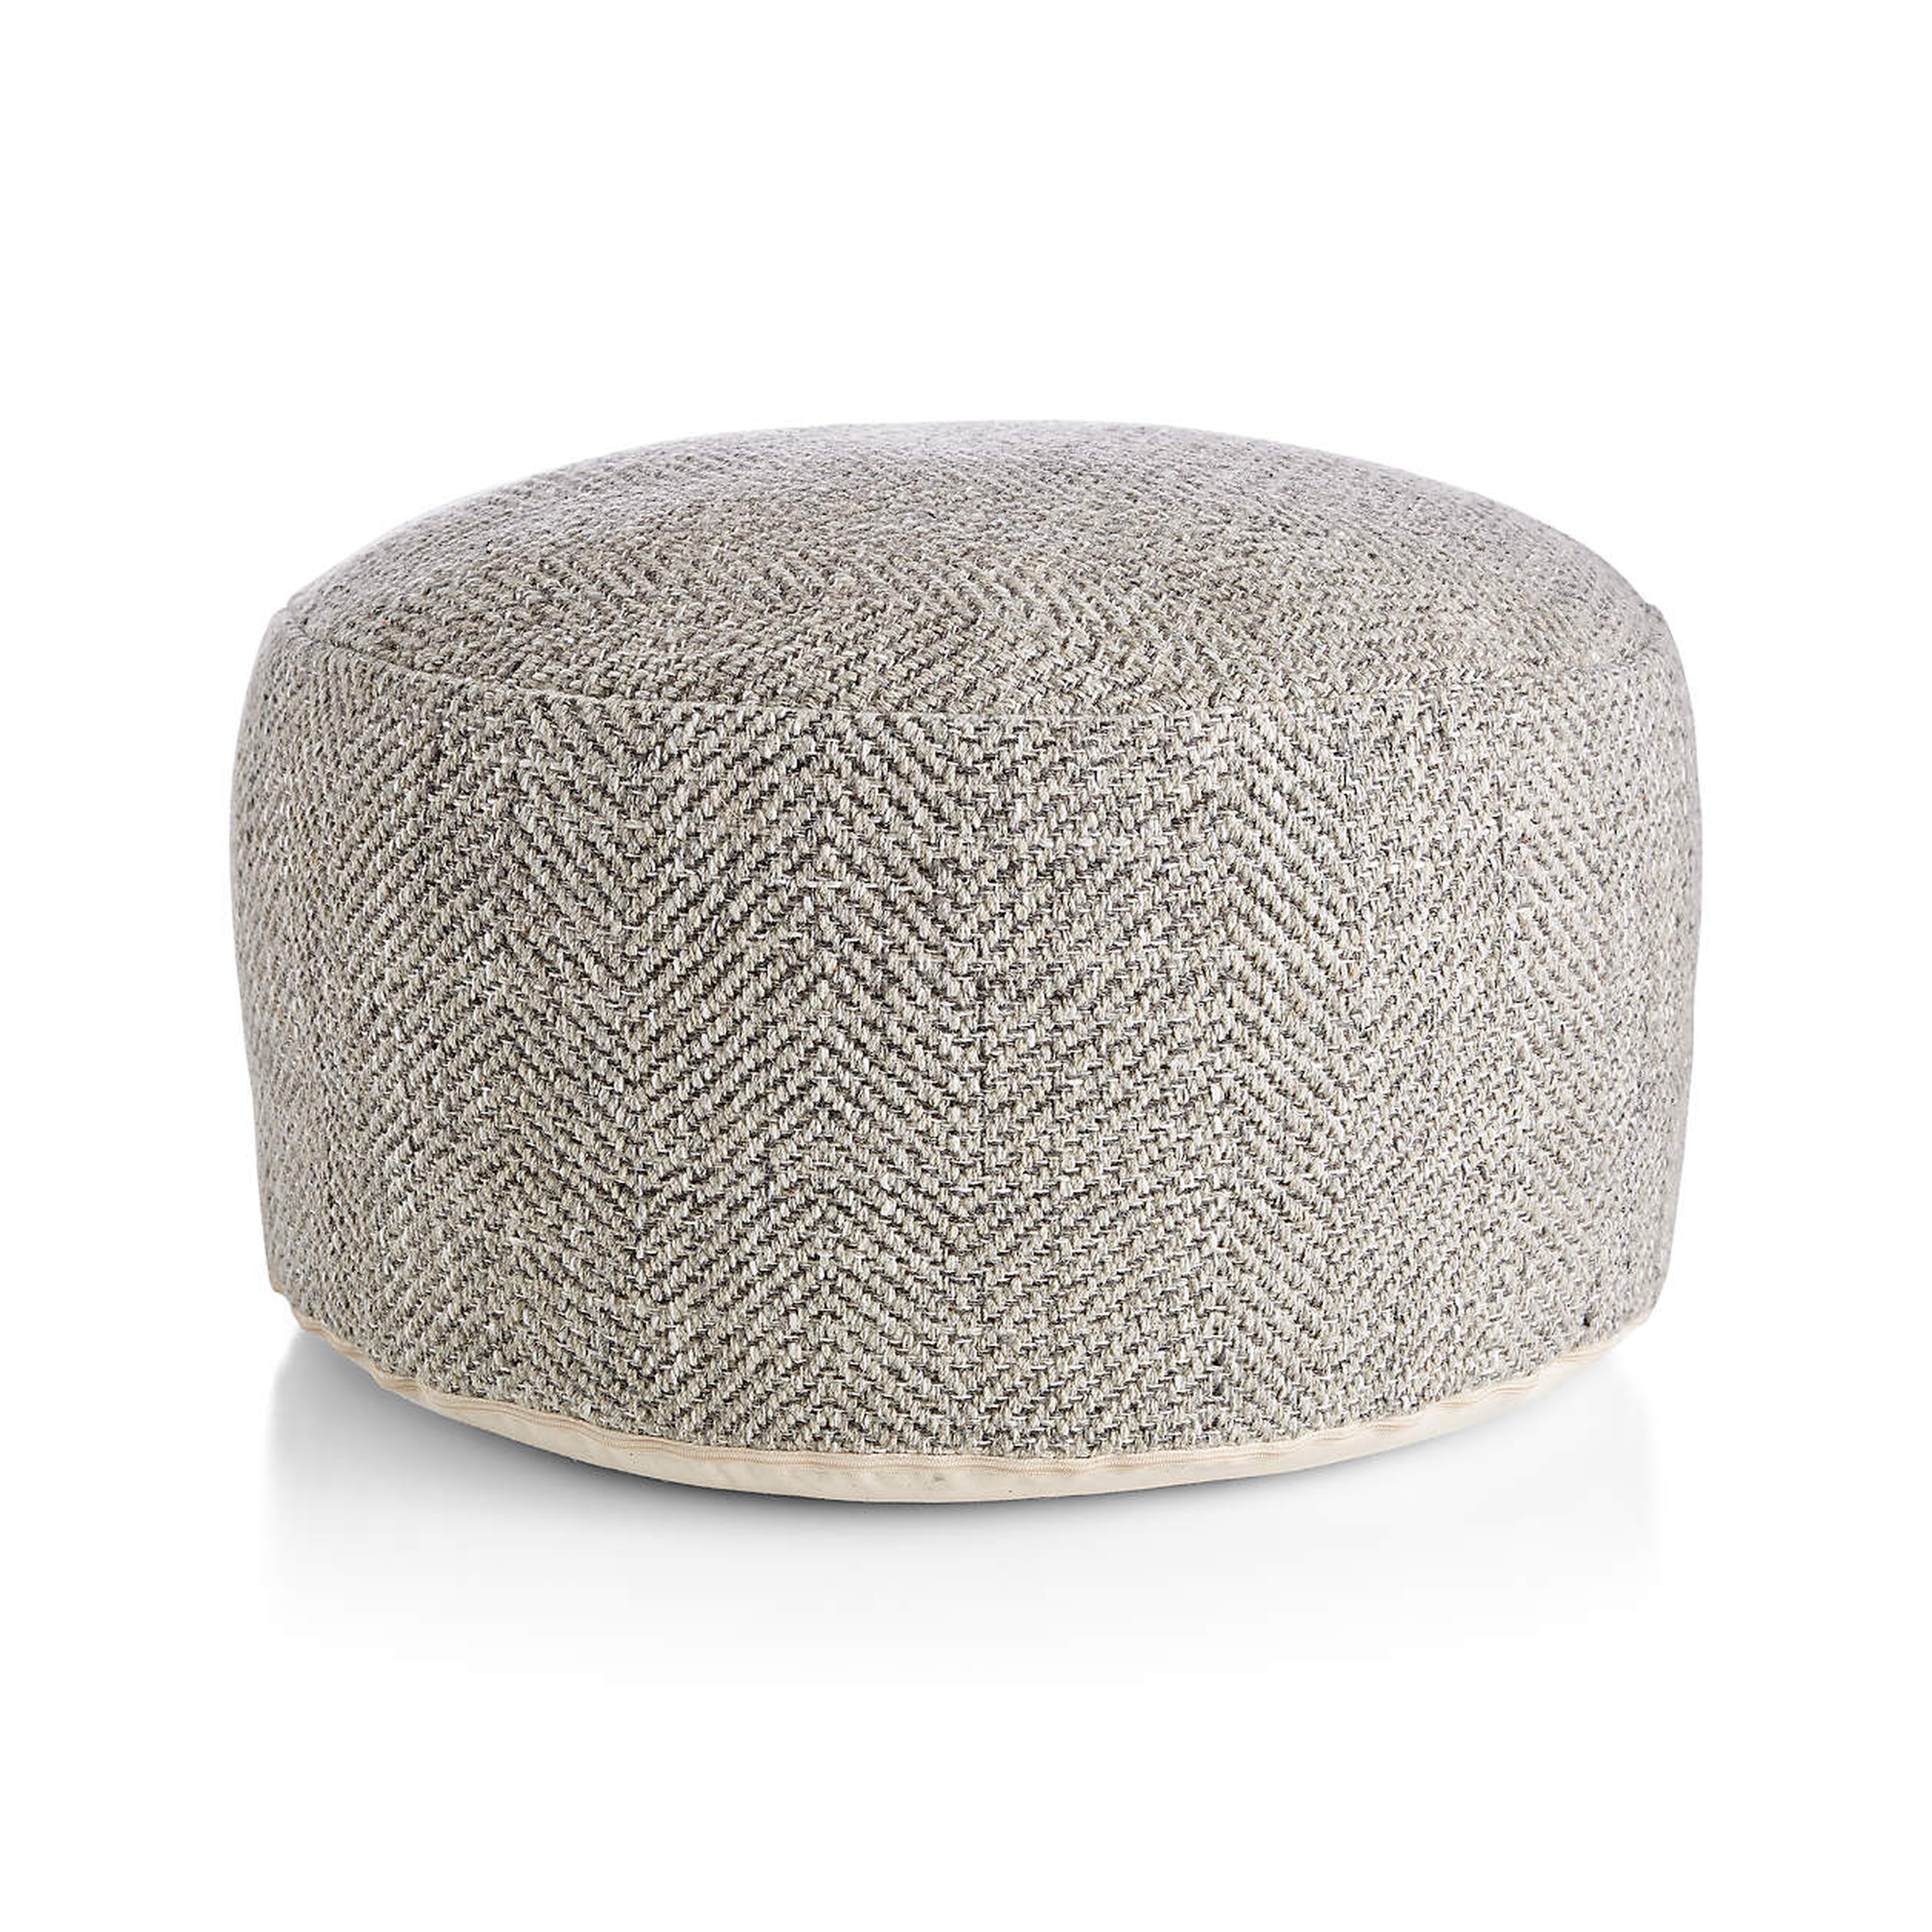 Fergus 30" Round Pouf - Crate and Barrel